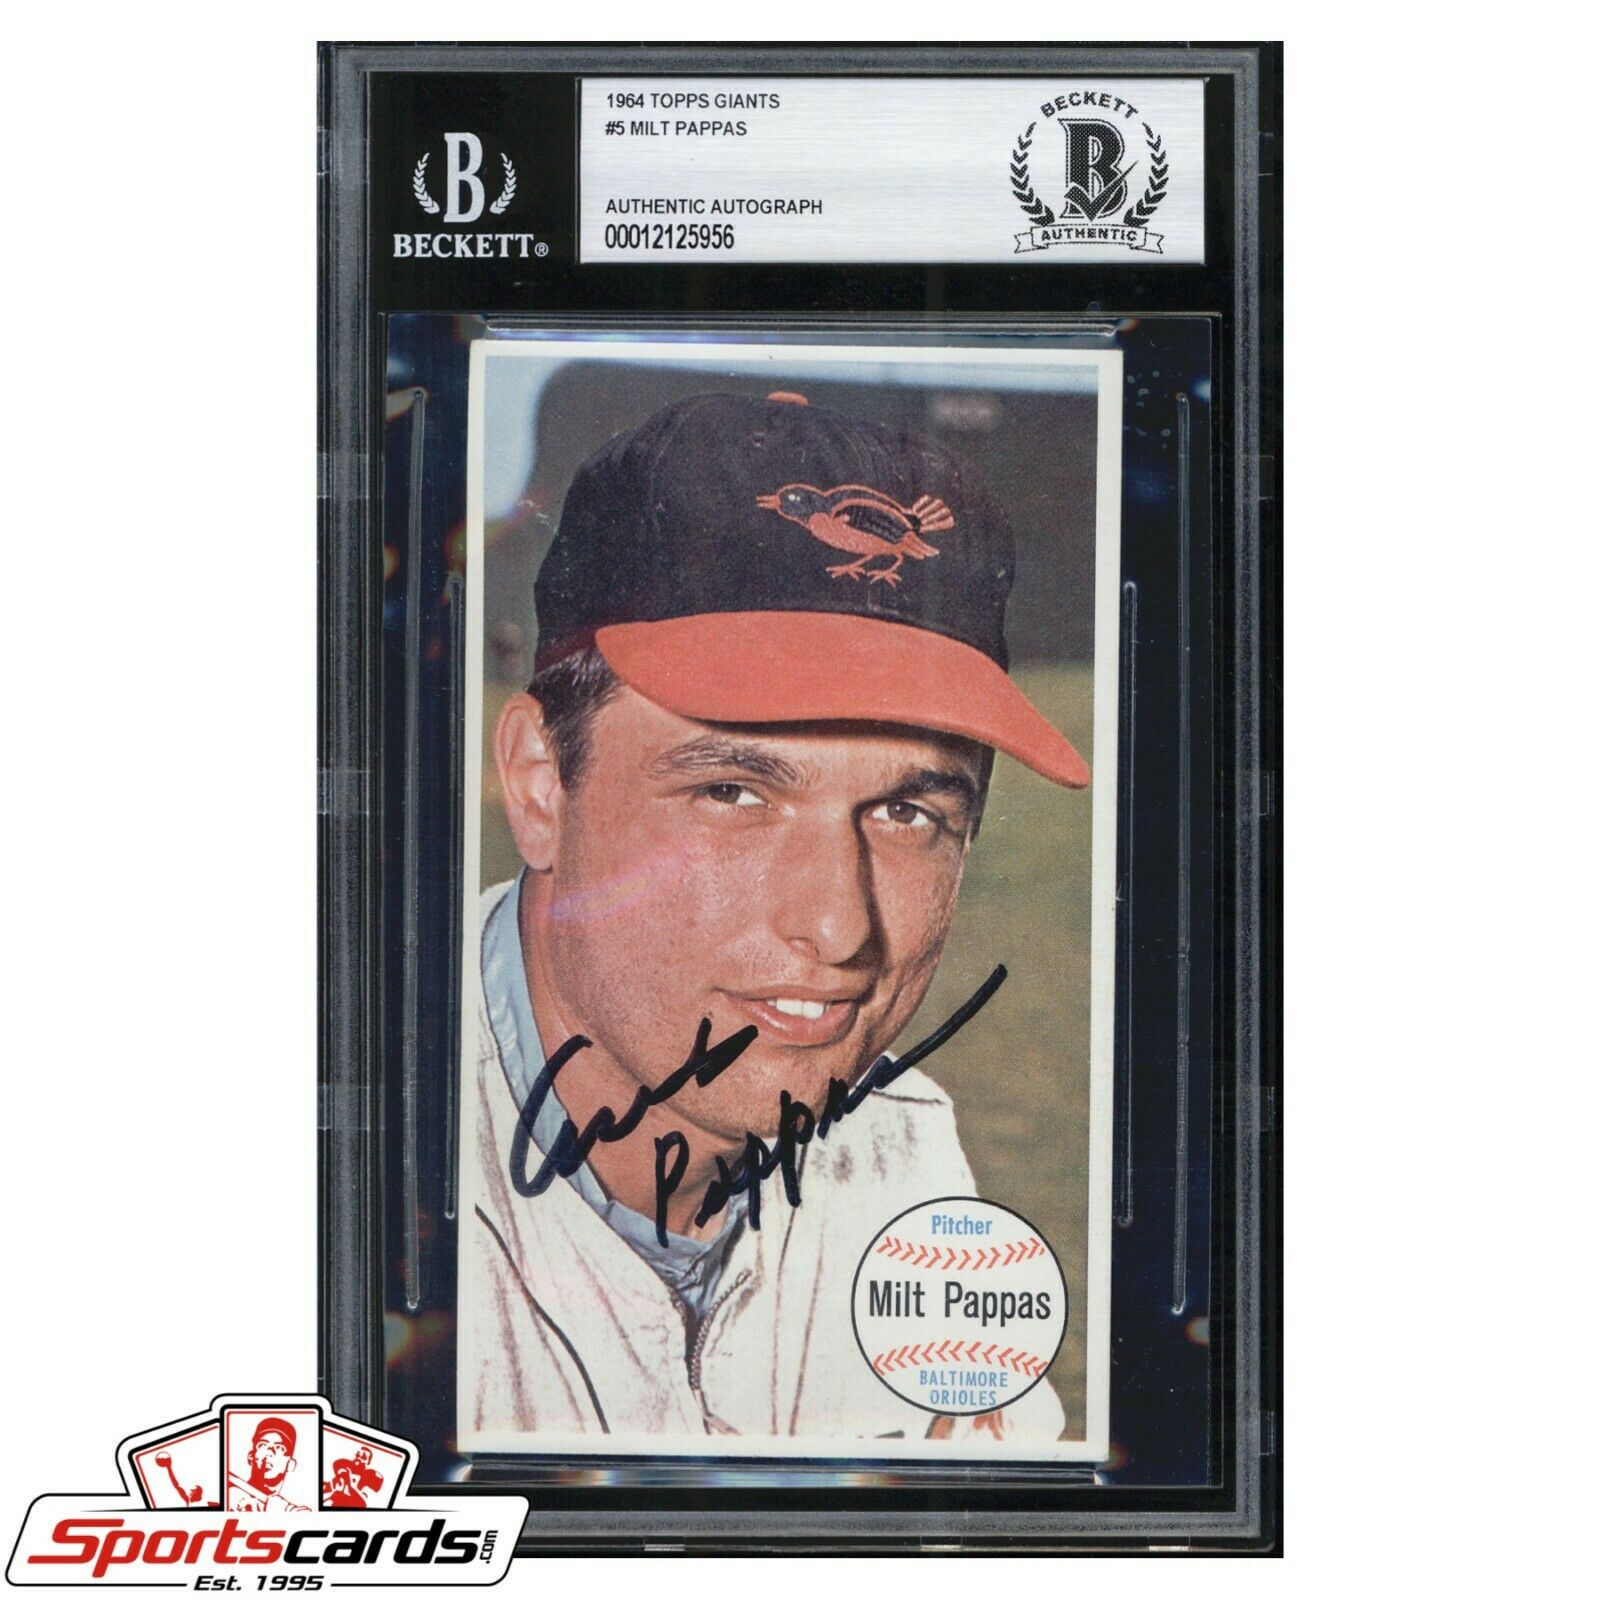 Milt Pappas Signed 1964 Topps Giants Card Beckett Authentic Auto